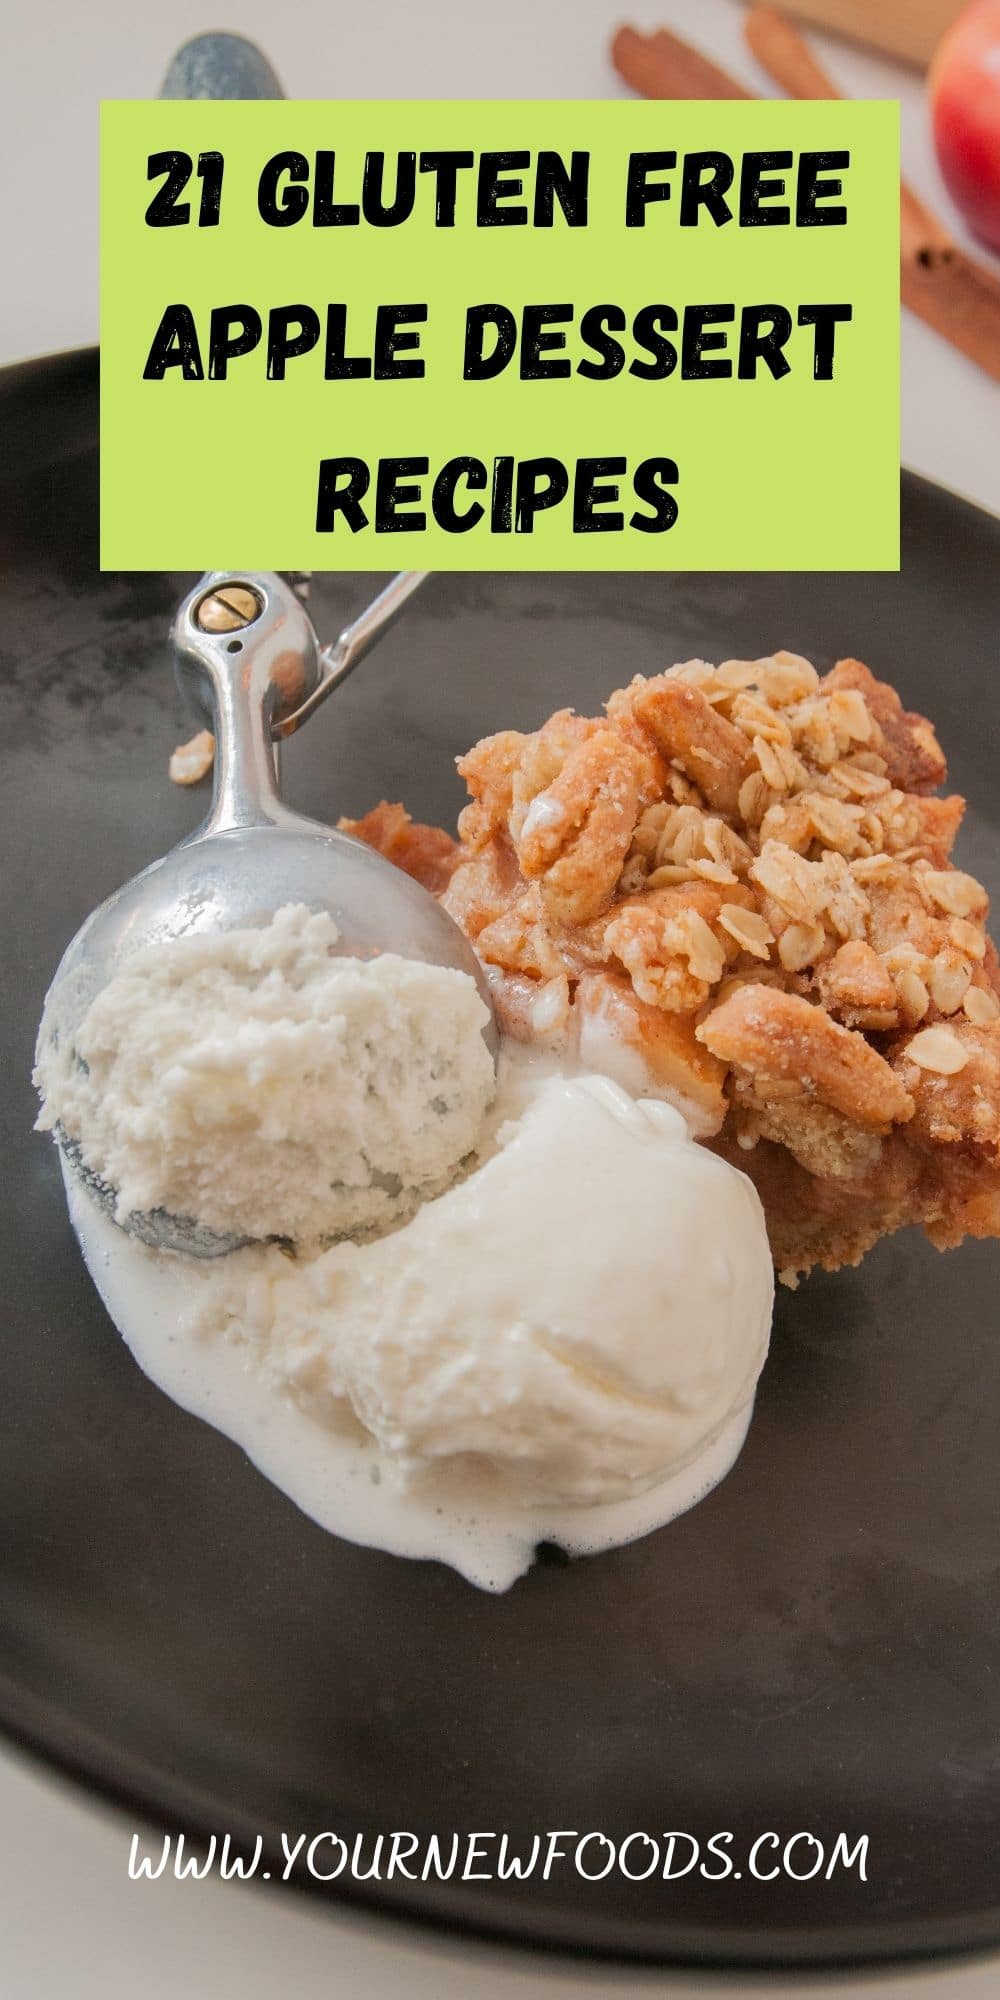 Gluten free apple crumble with a scoop of ice-cream